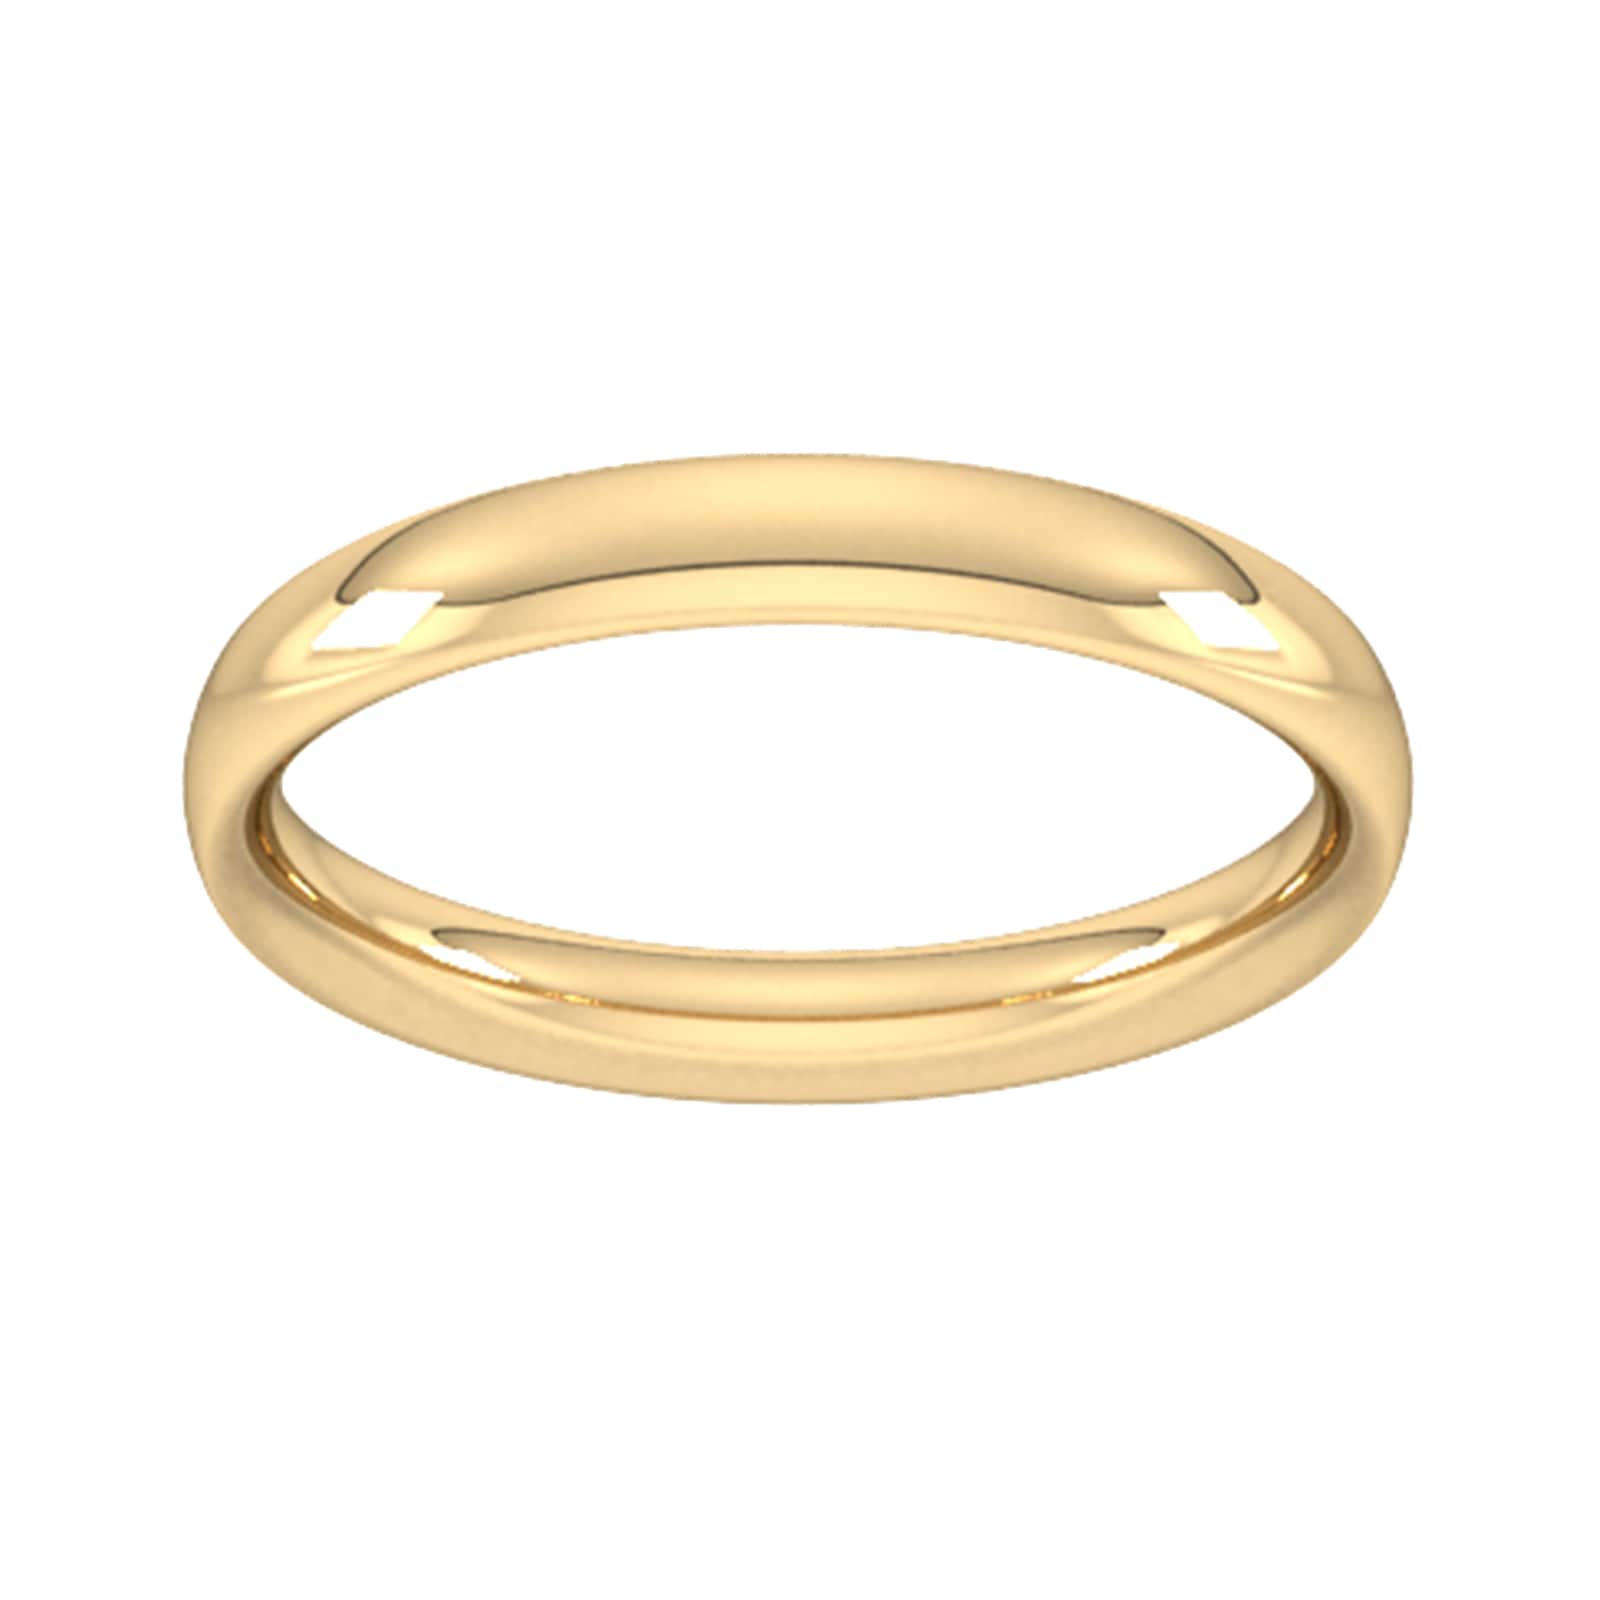 3mm Traditional Court Heavy Wedding Ring In 9 Carat Yellow Gold - Ring Size T